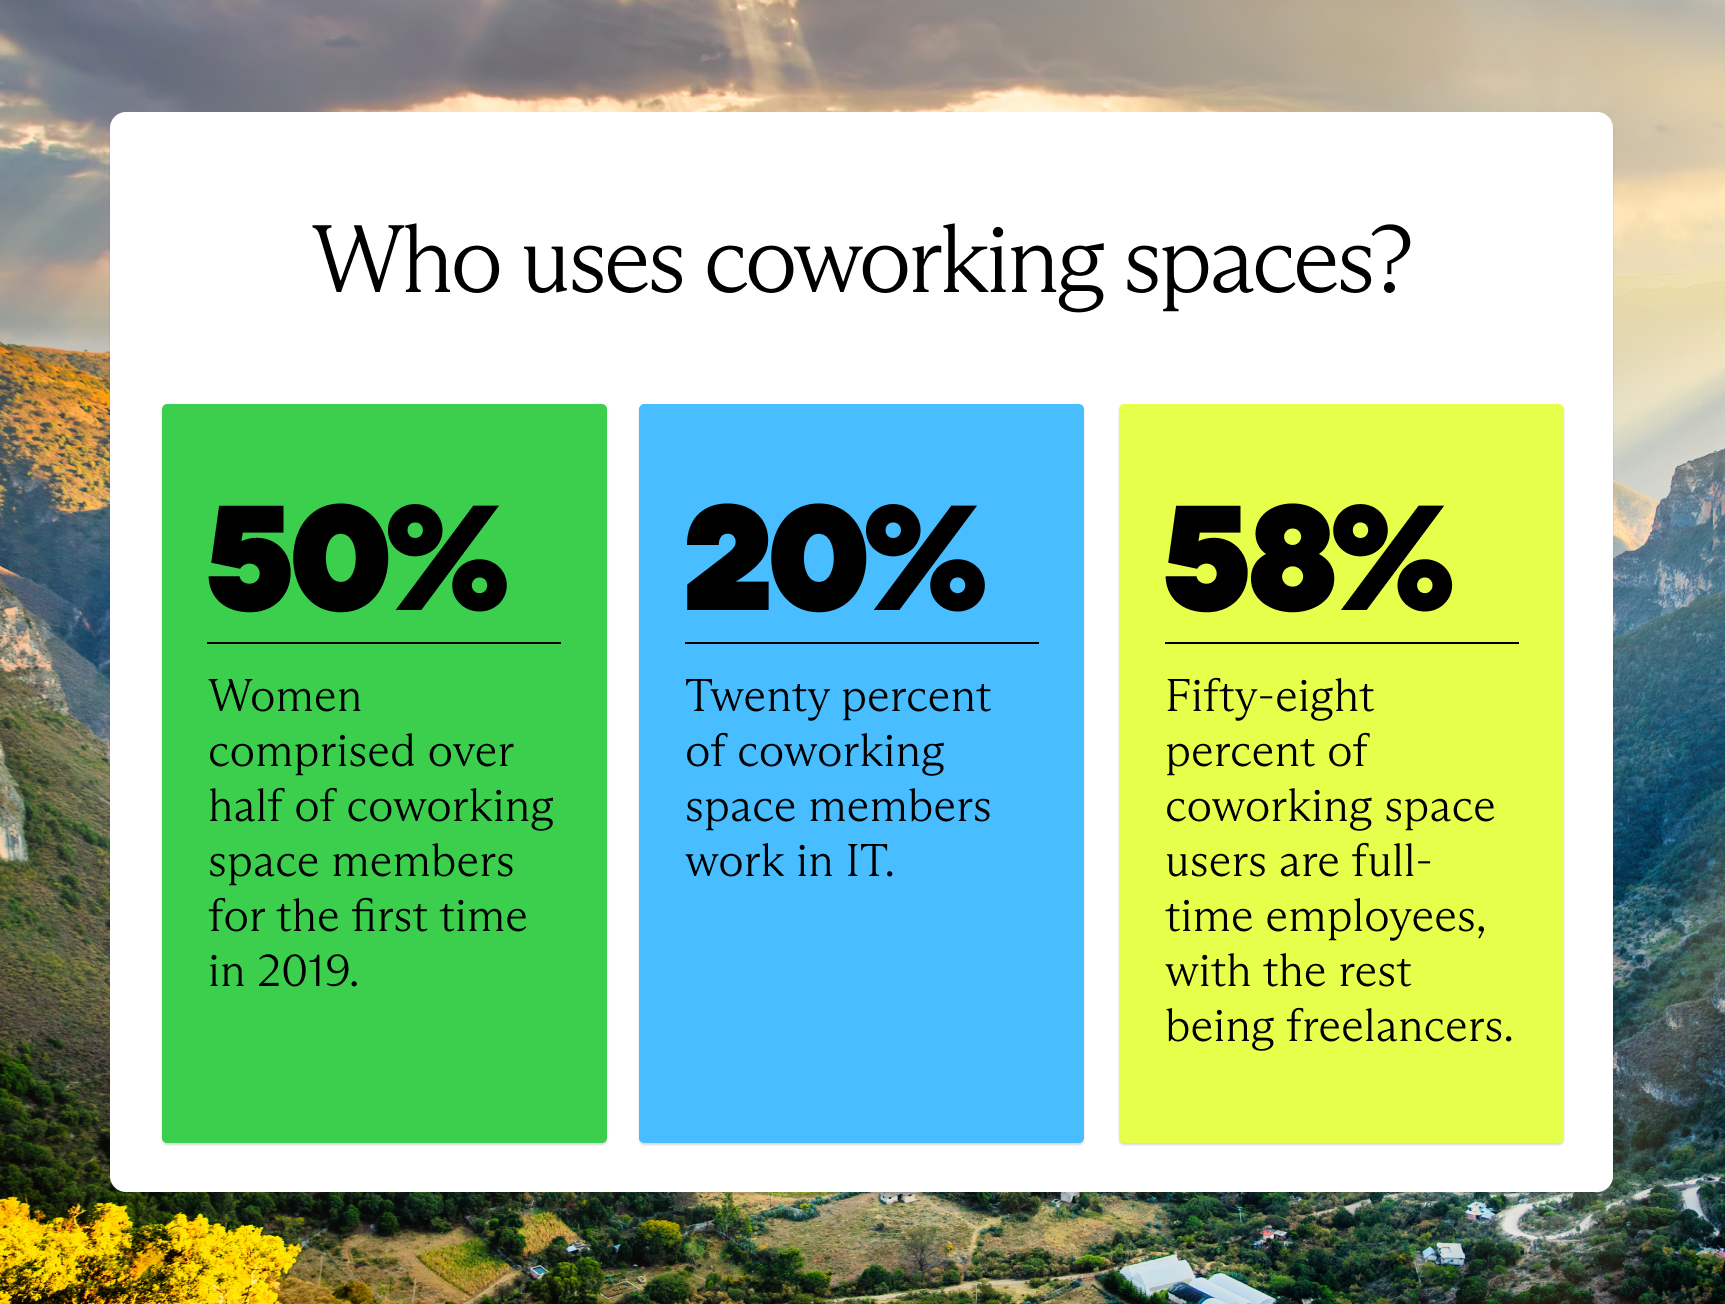 Who uses coworking spaces?